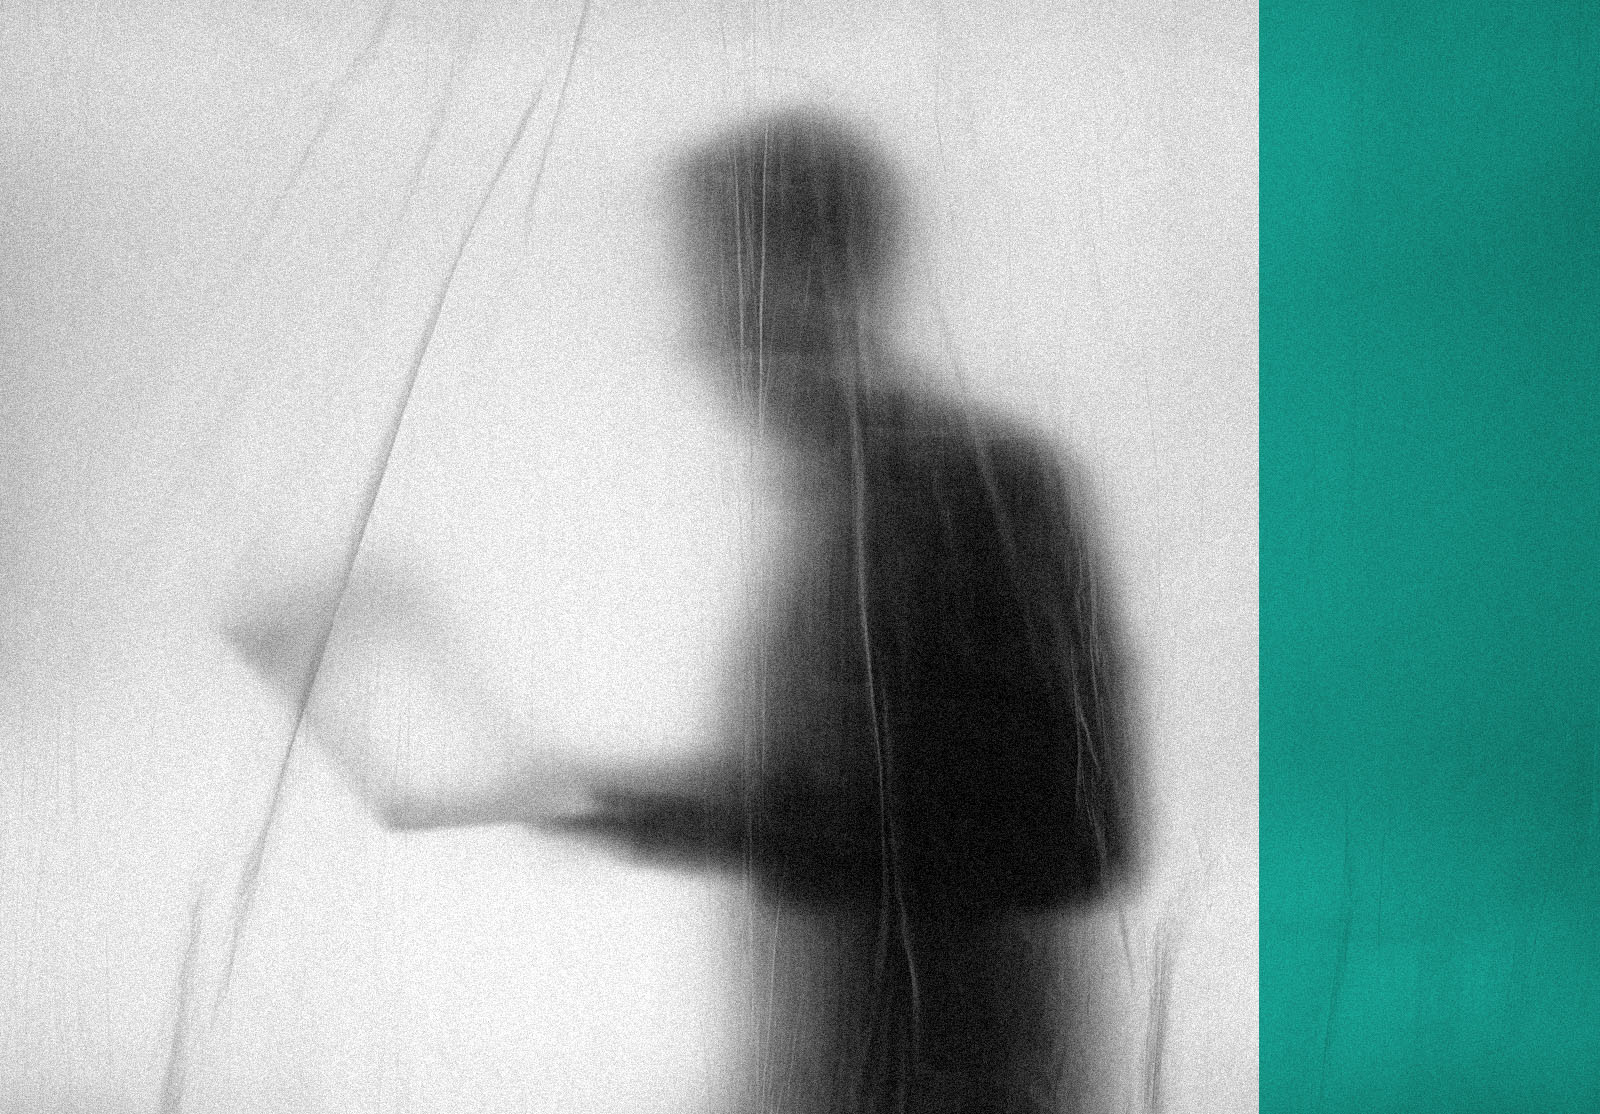 Silhouette of man with computer behind a curtain that blurs his identity